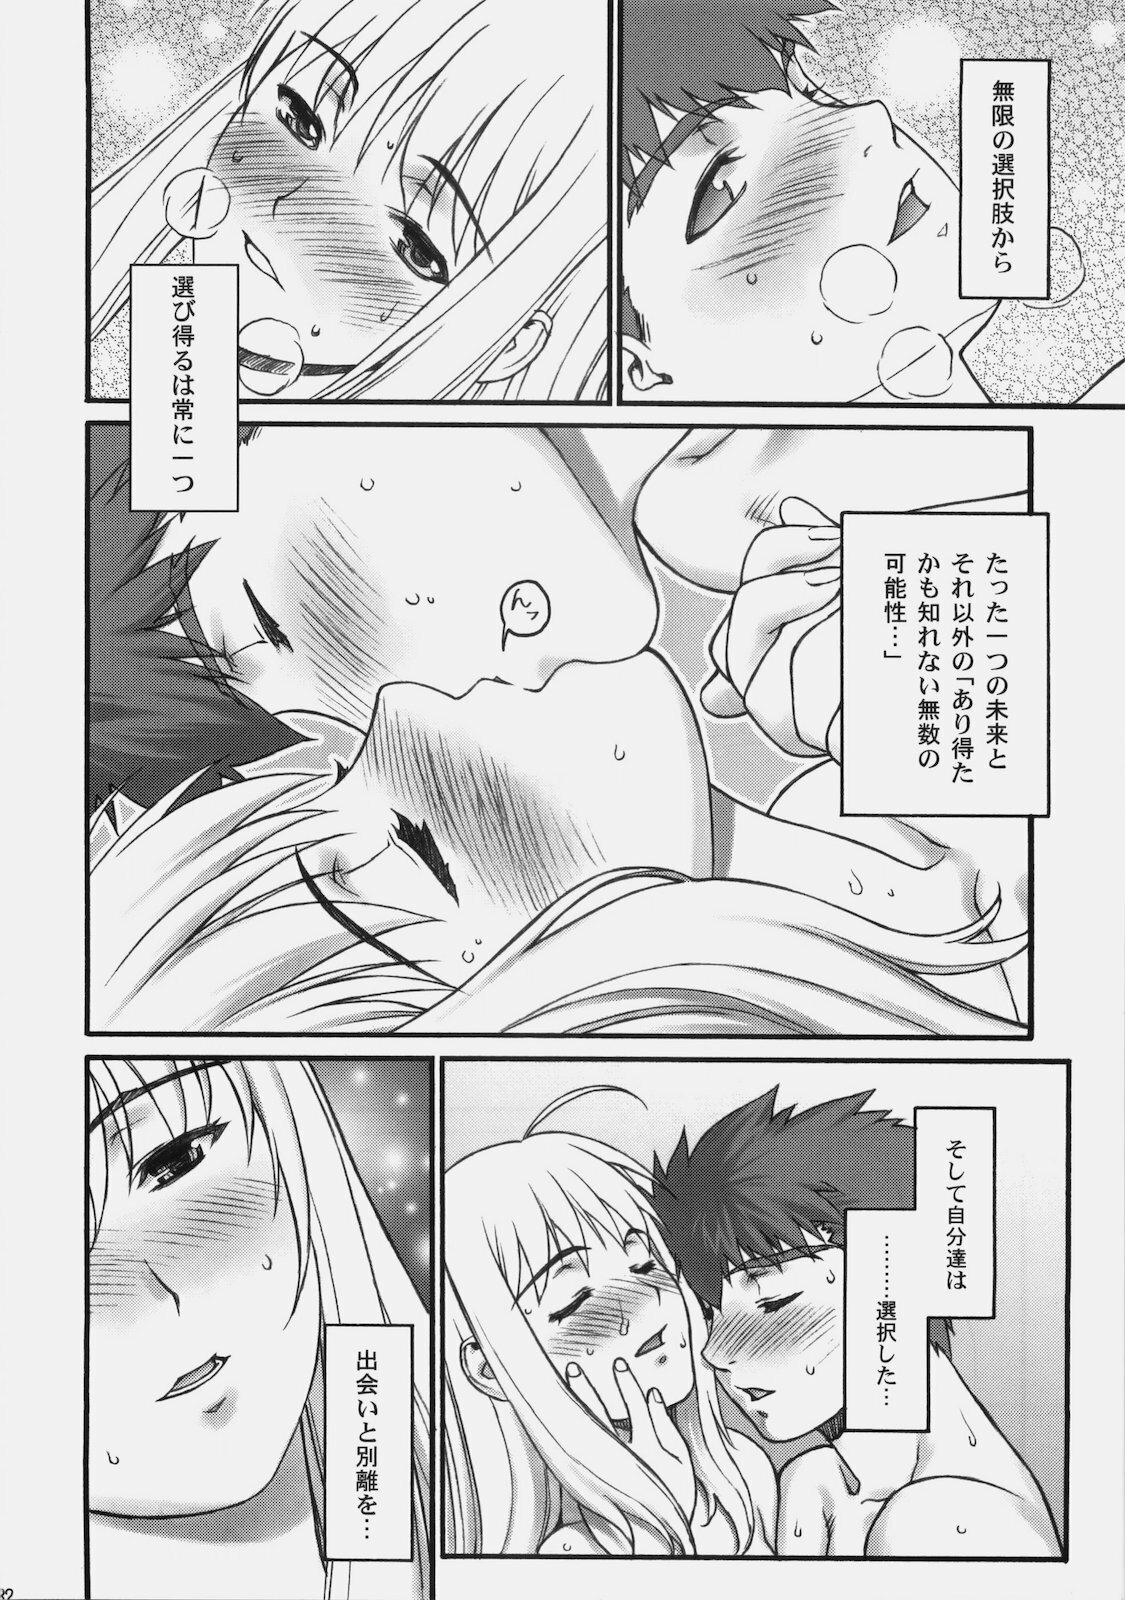 [Motchie Kingdom (Motchie)] Theater of Fate (Fate/stay night) page 29 full